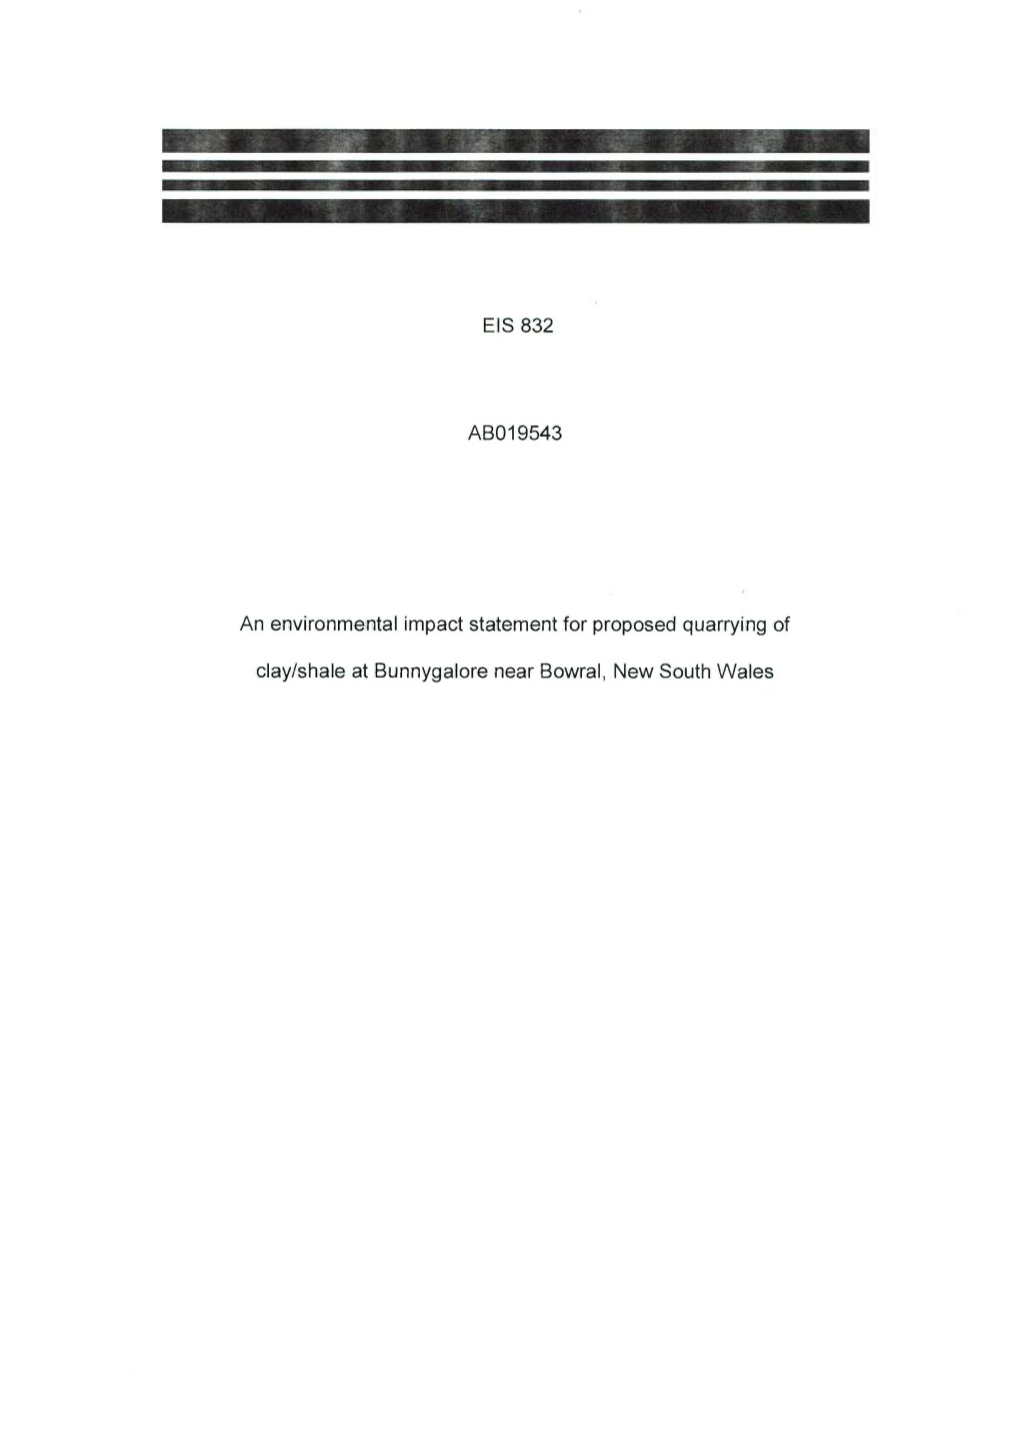 EIS 832 ABOI 9543 an Environmental Impact Statement for Proposed